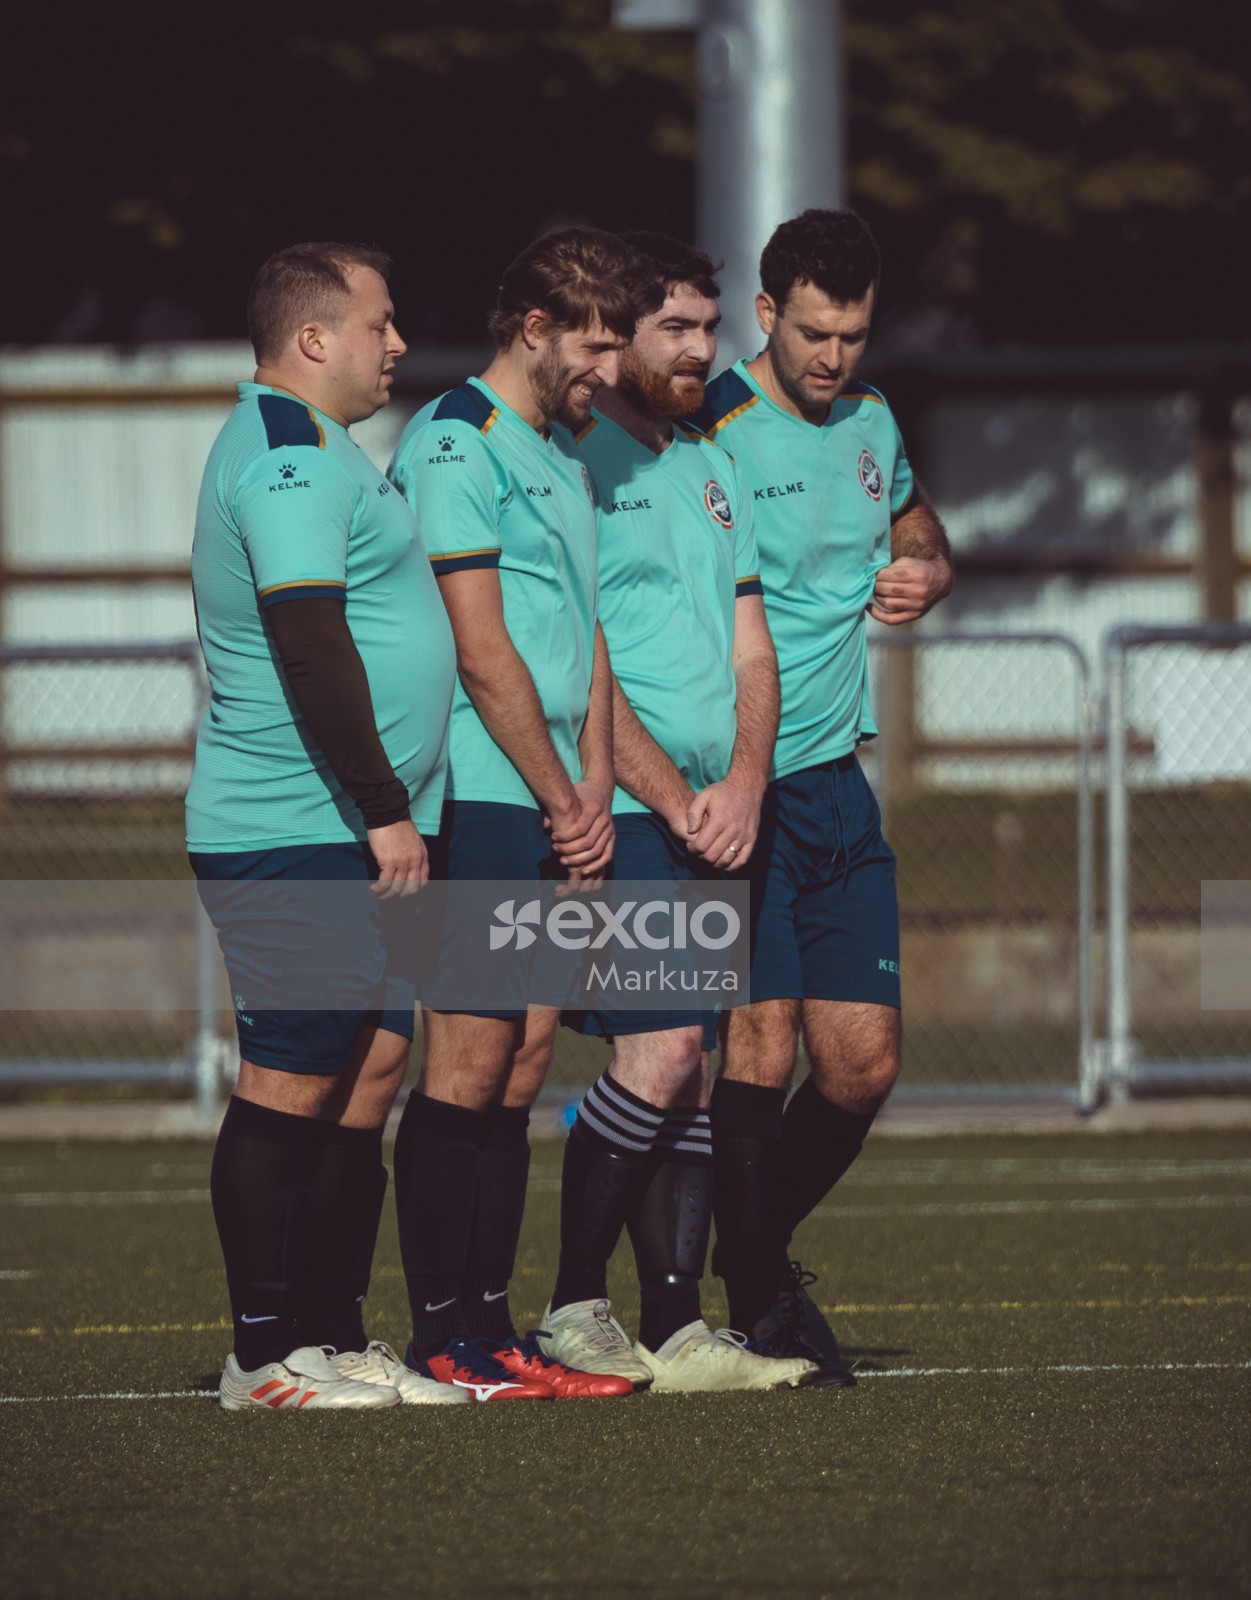 Teammates in turquoise Kelme shirts form defence against freekick